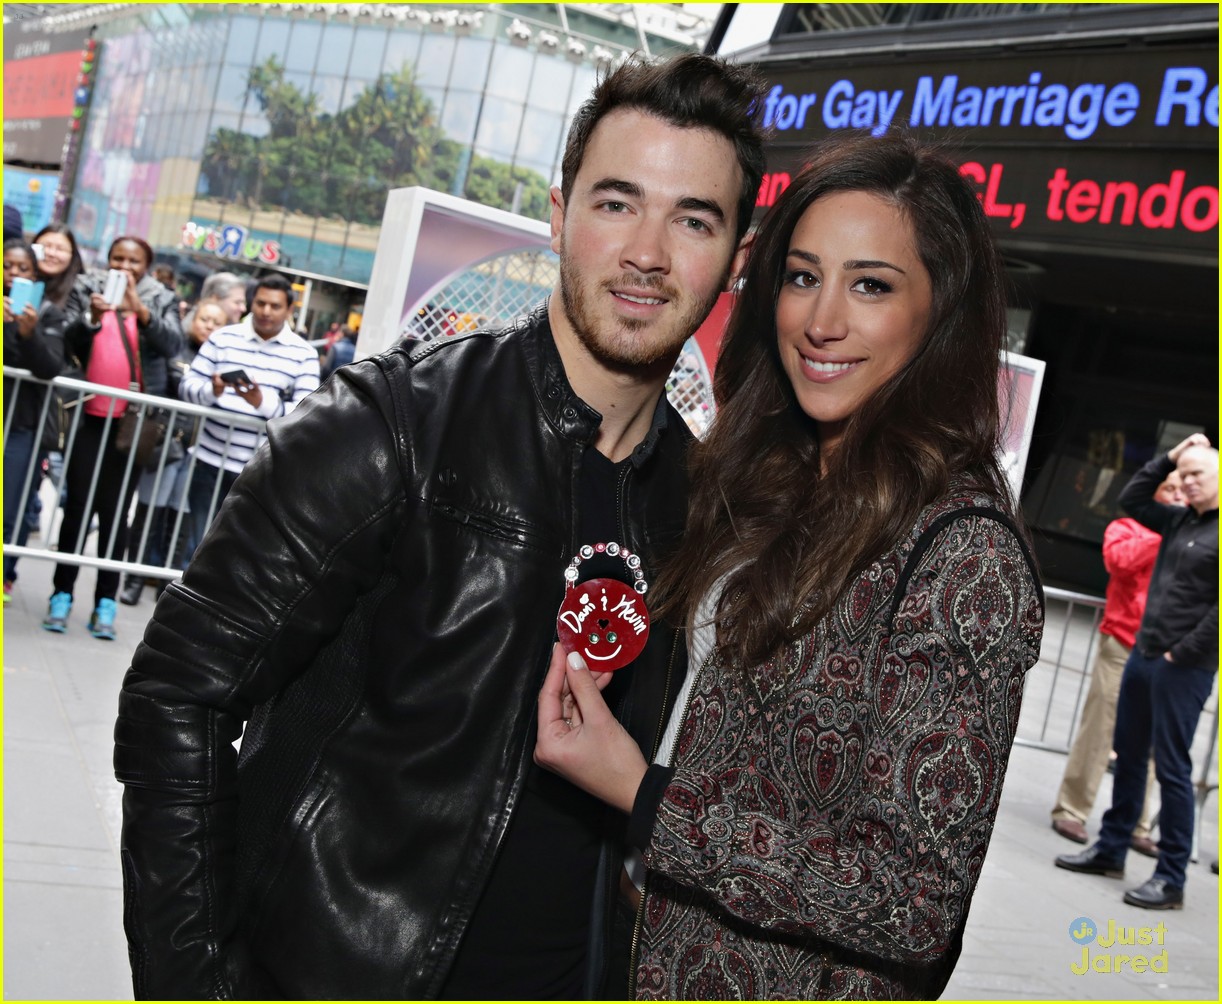 kevin danielle jonas national lovers day nyc 23